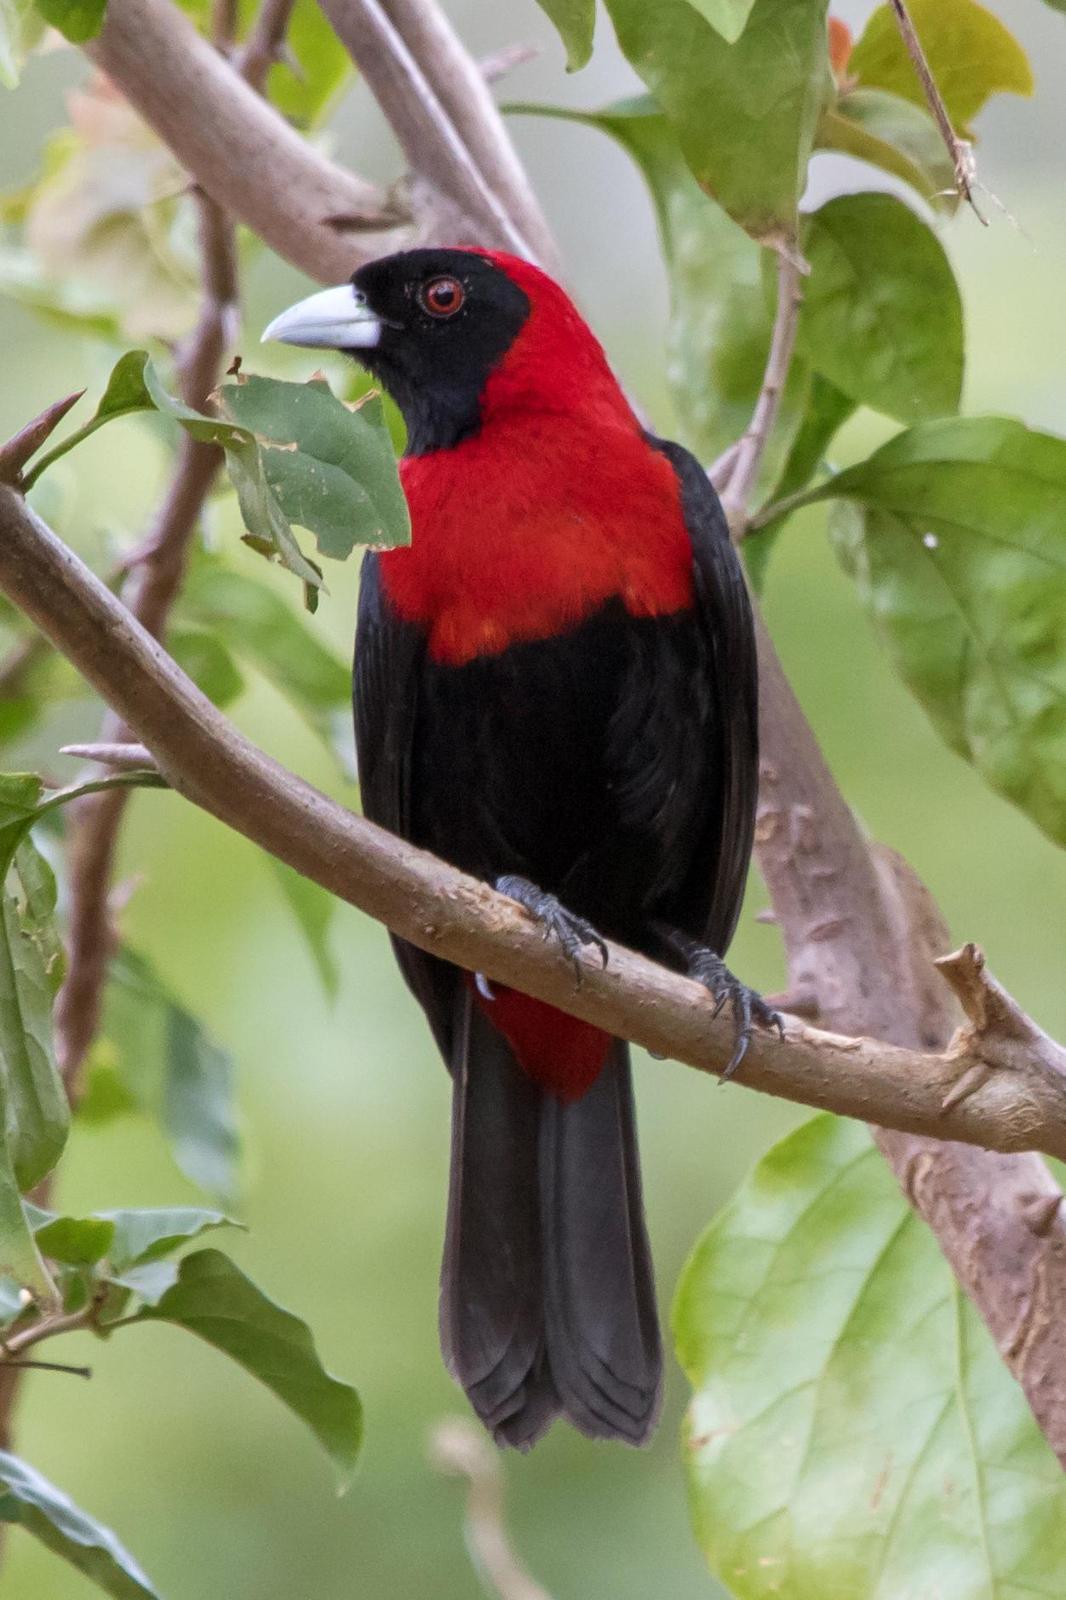 Crimson-collared Tanager Photo by Ashley Bradford